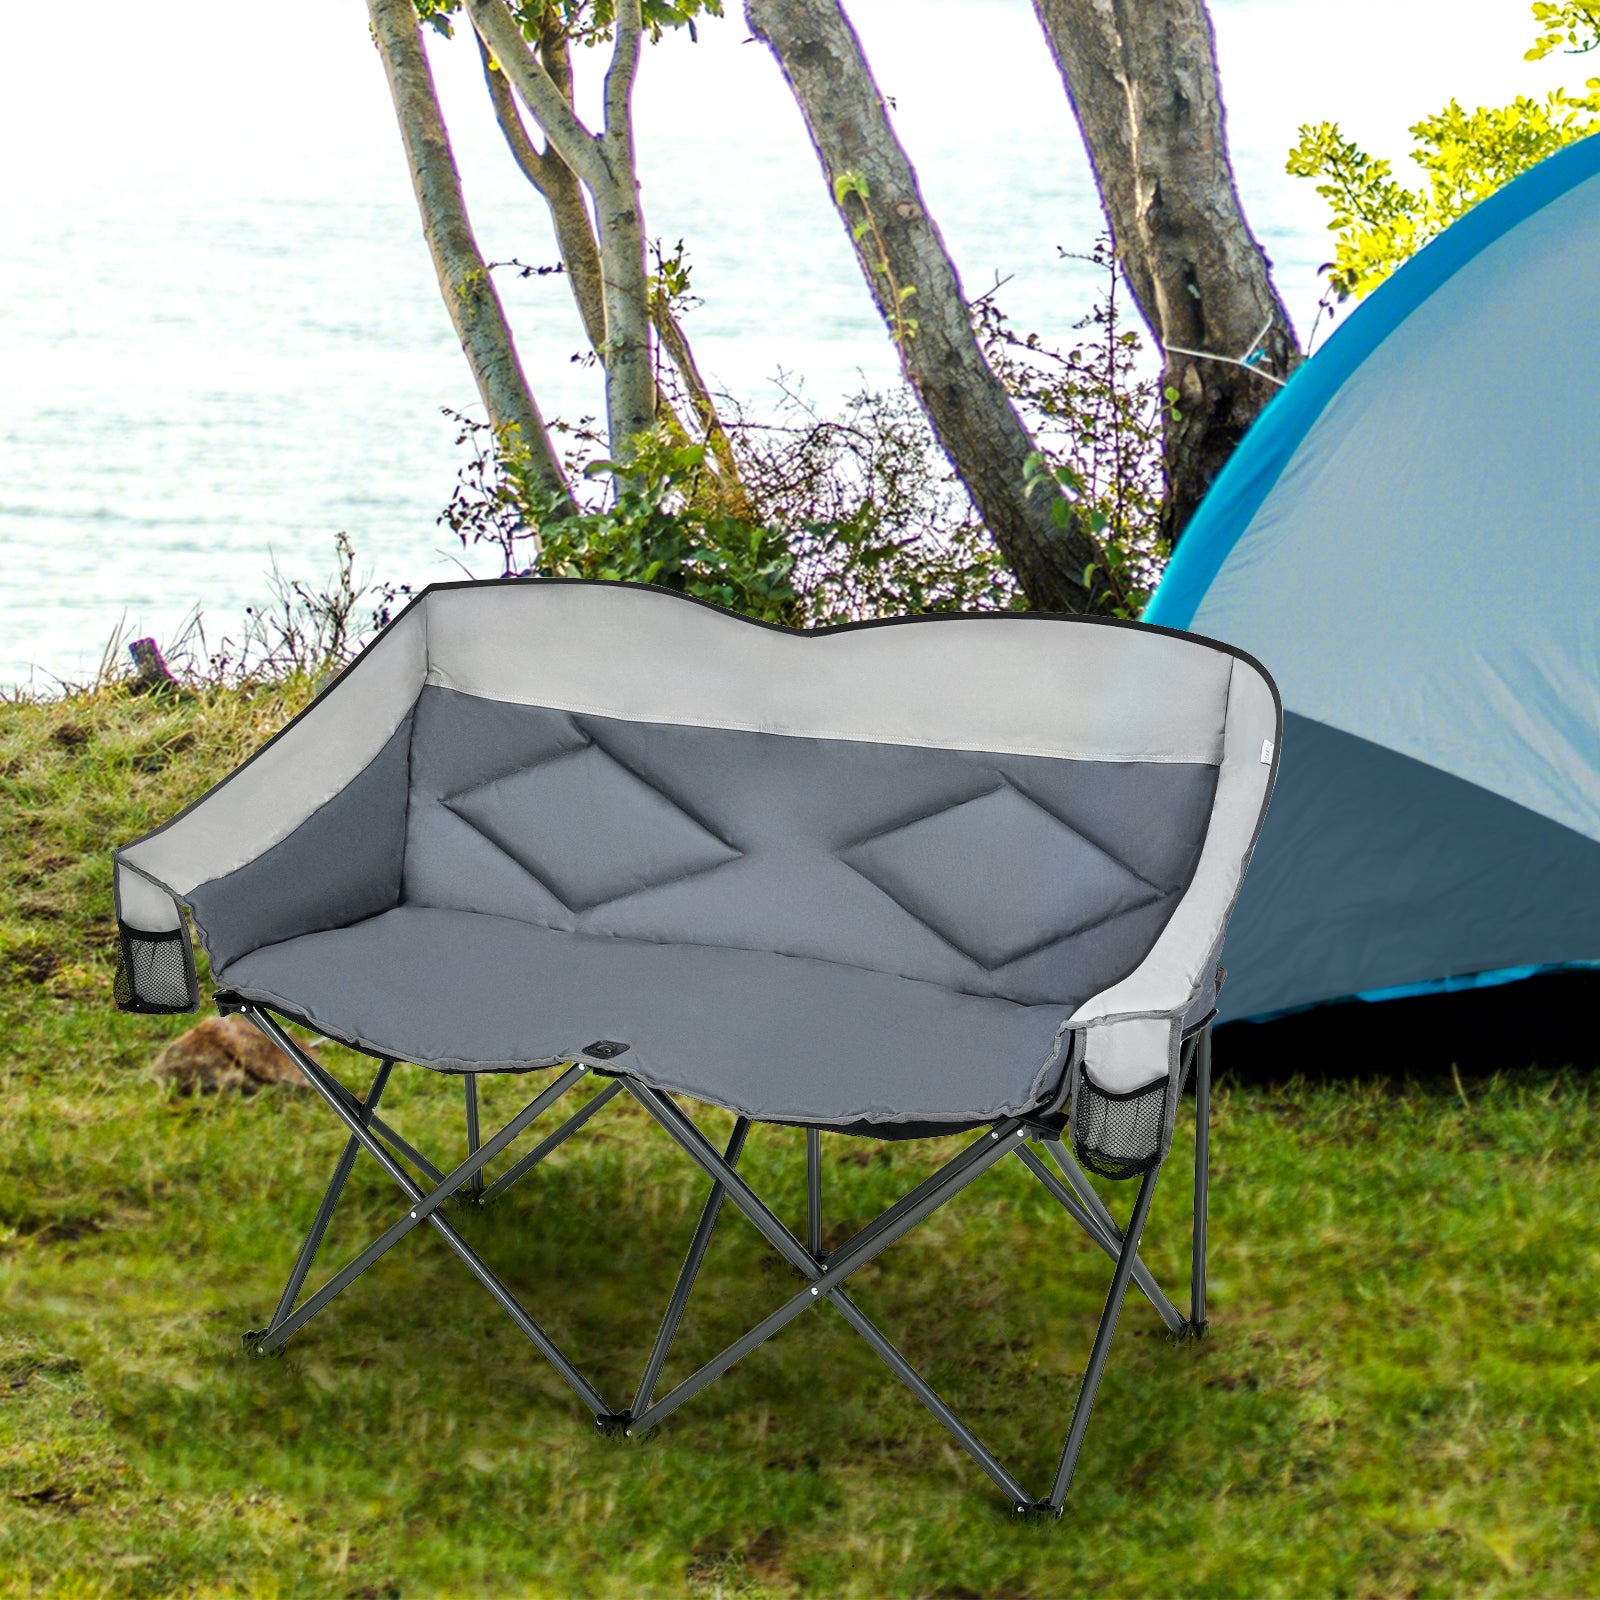 Double Folding Camping Chair with Padded Seat and Storage Pockets-Grey